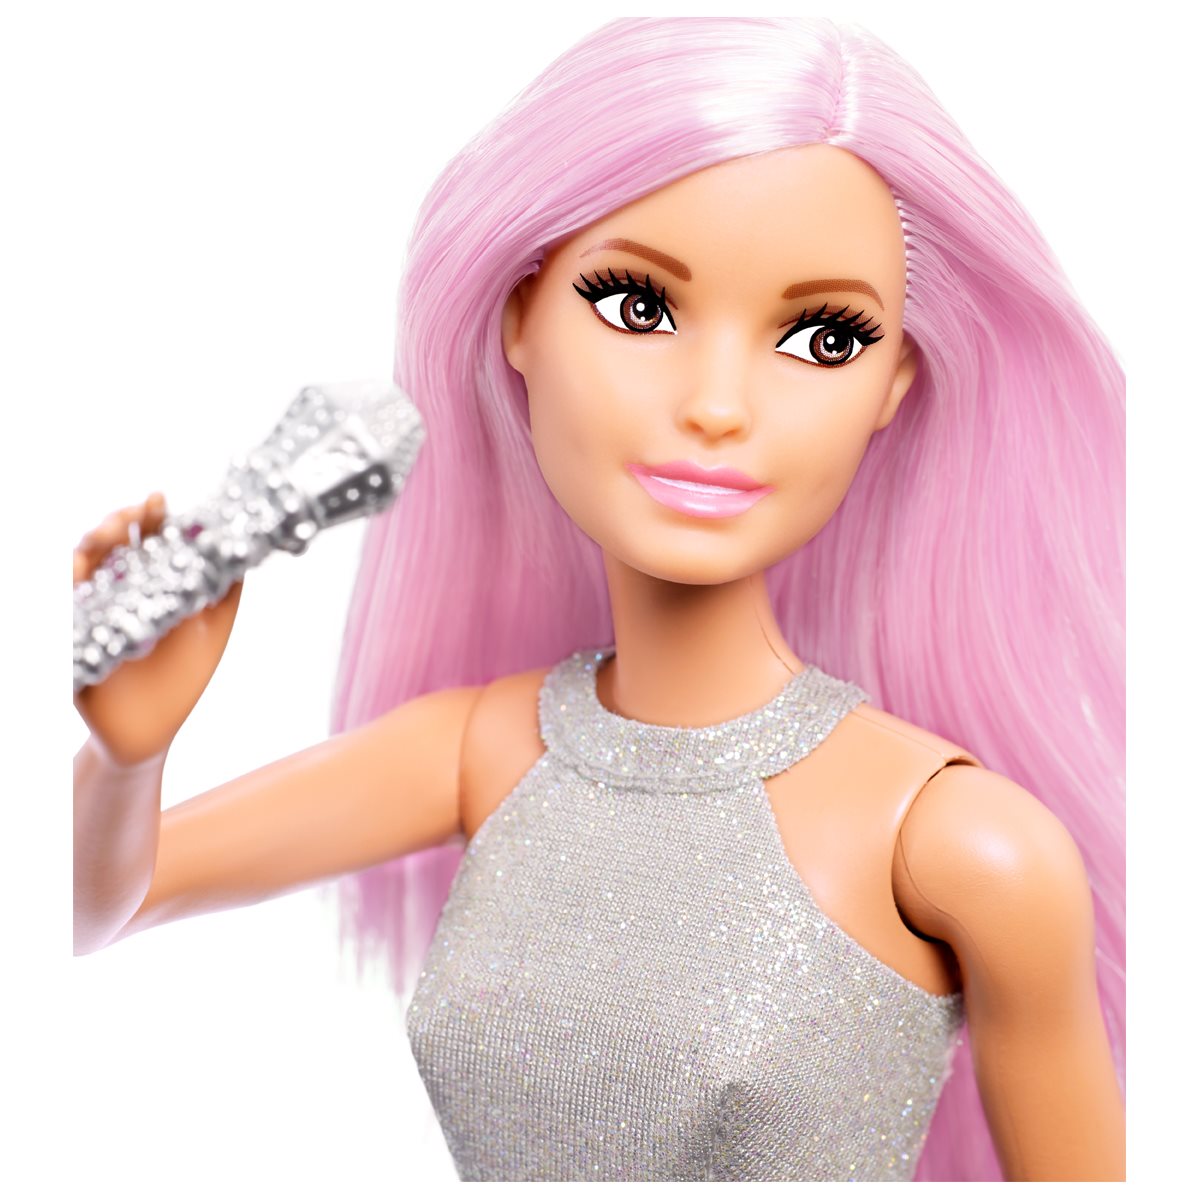 Barbie Pop Star Doll with Pink Hair - Entertainment Earth